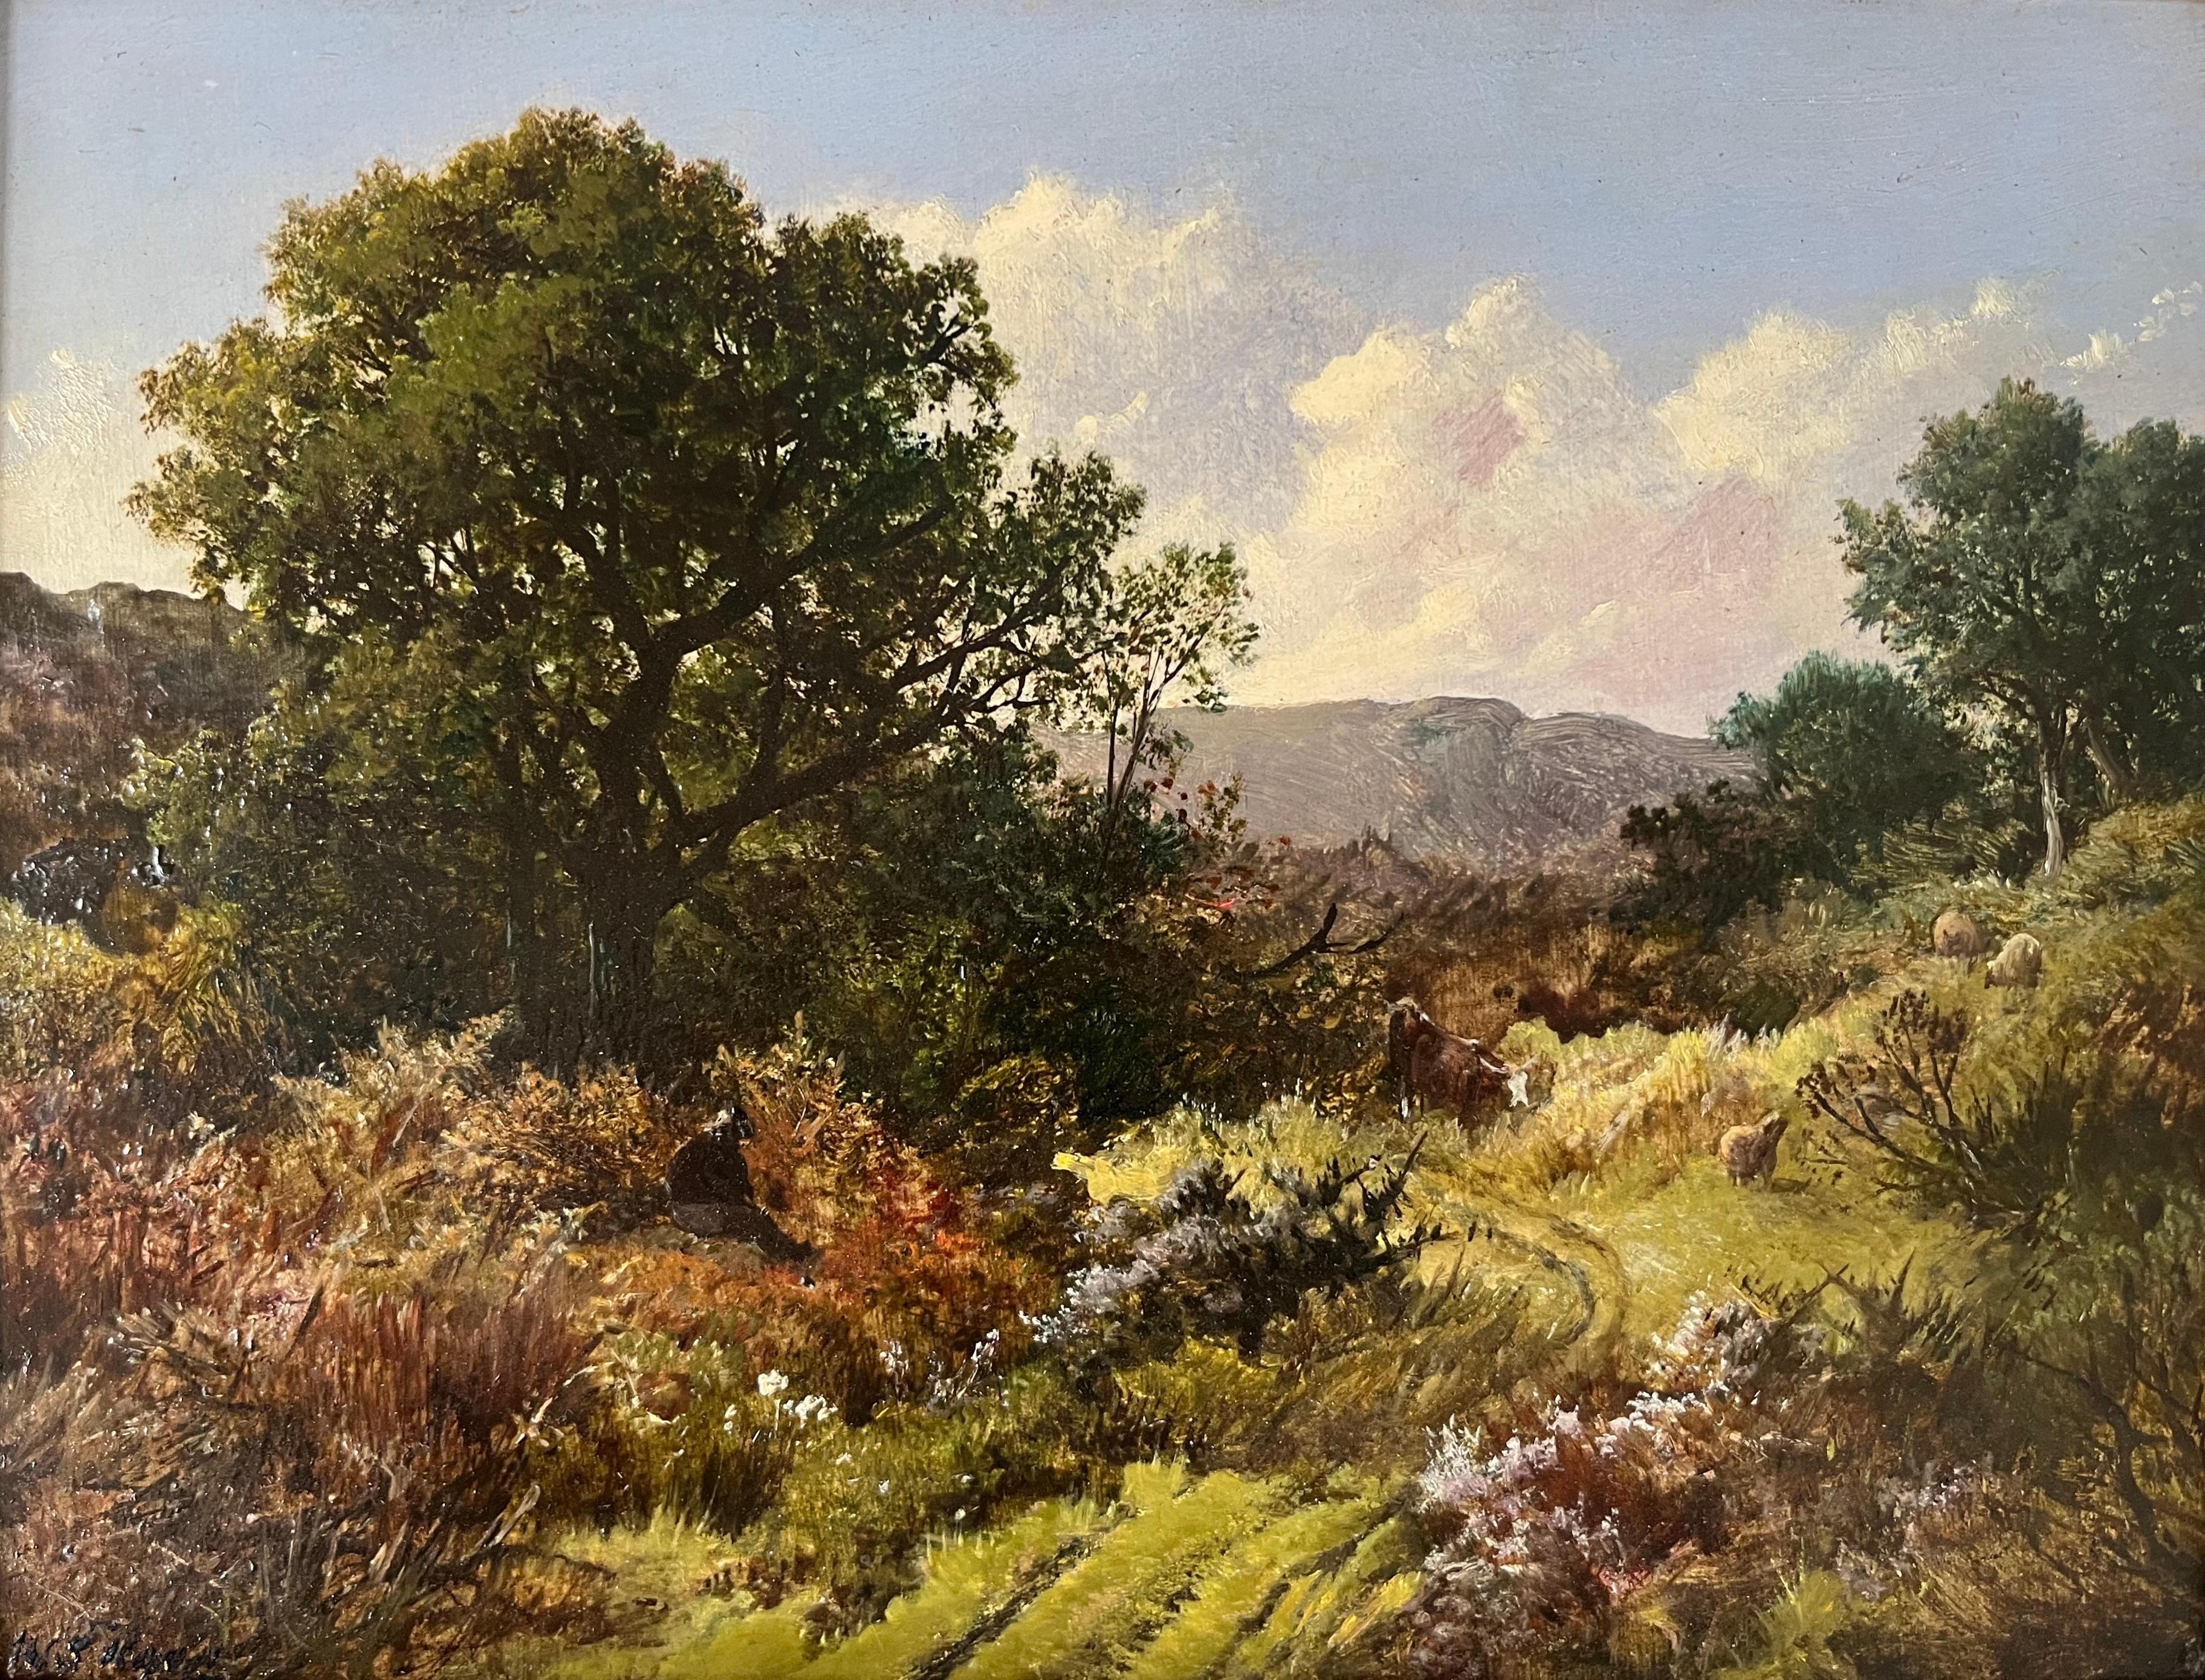 An idyllic view of cattle and sheep grazing in a pasture before an oak tree with a blue sky with bollowing clouds beyond. 

William S Rose (1810-1873)
Cattle and sheep grazing in rough pastures
Signed and inscribed on a label verso
Oil on panel
6½ x